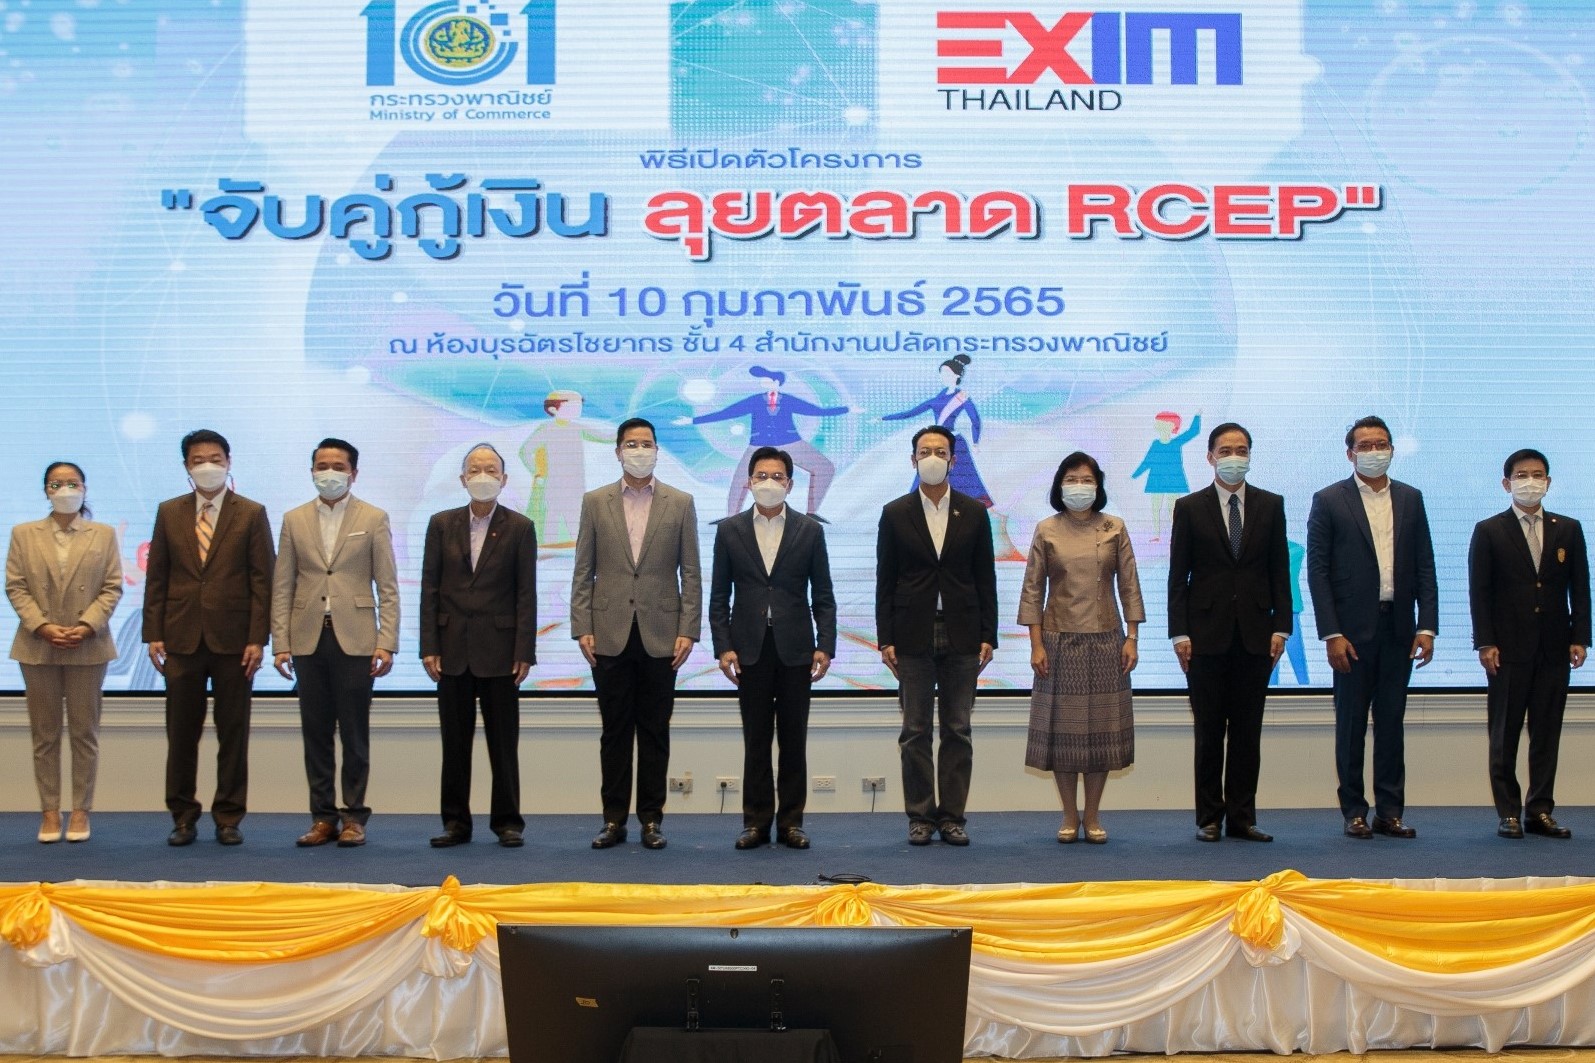 EXIM Thailand Teams up with Ministry of Commerce in Credit Financing with Lowest Interest Rate of 2.75% p.a. and Building SME Exporters to Penetrate World Markets, Particularly the RCEP